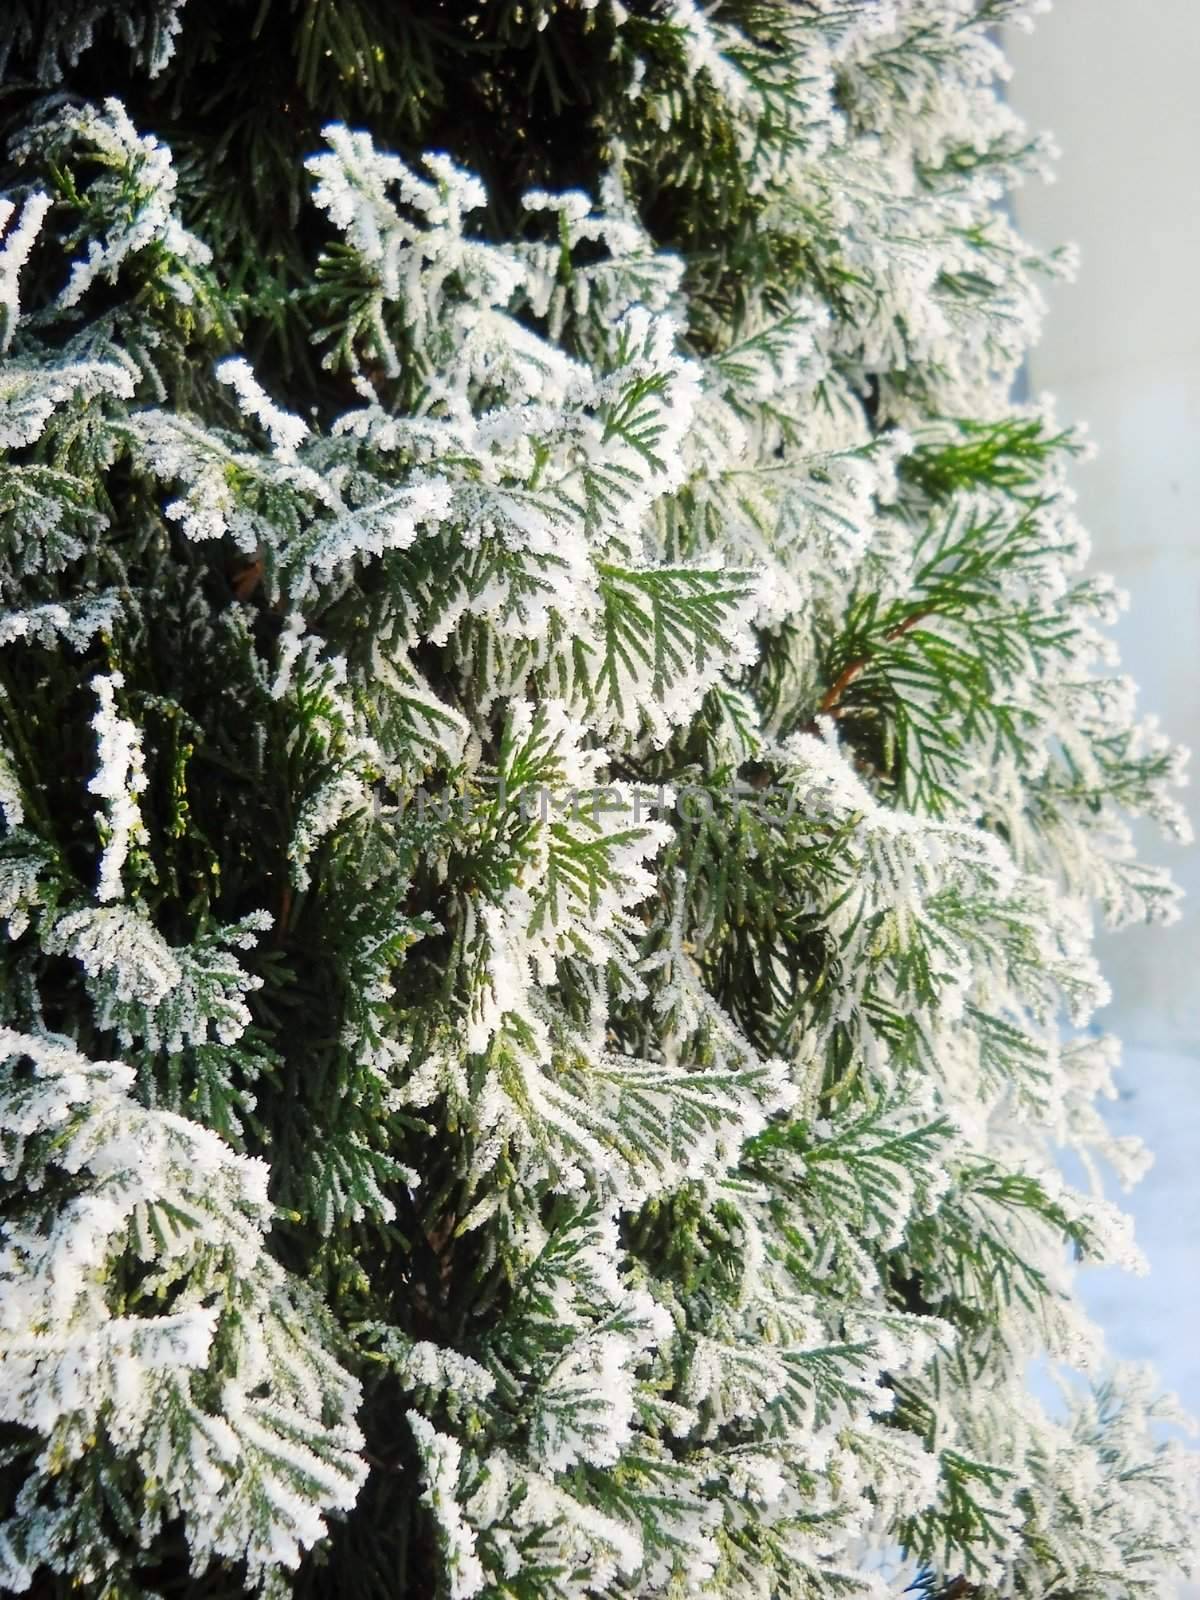 frost on Chamaecyparis tree branch over snow winter background